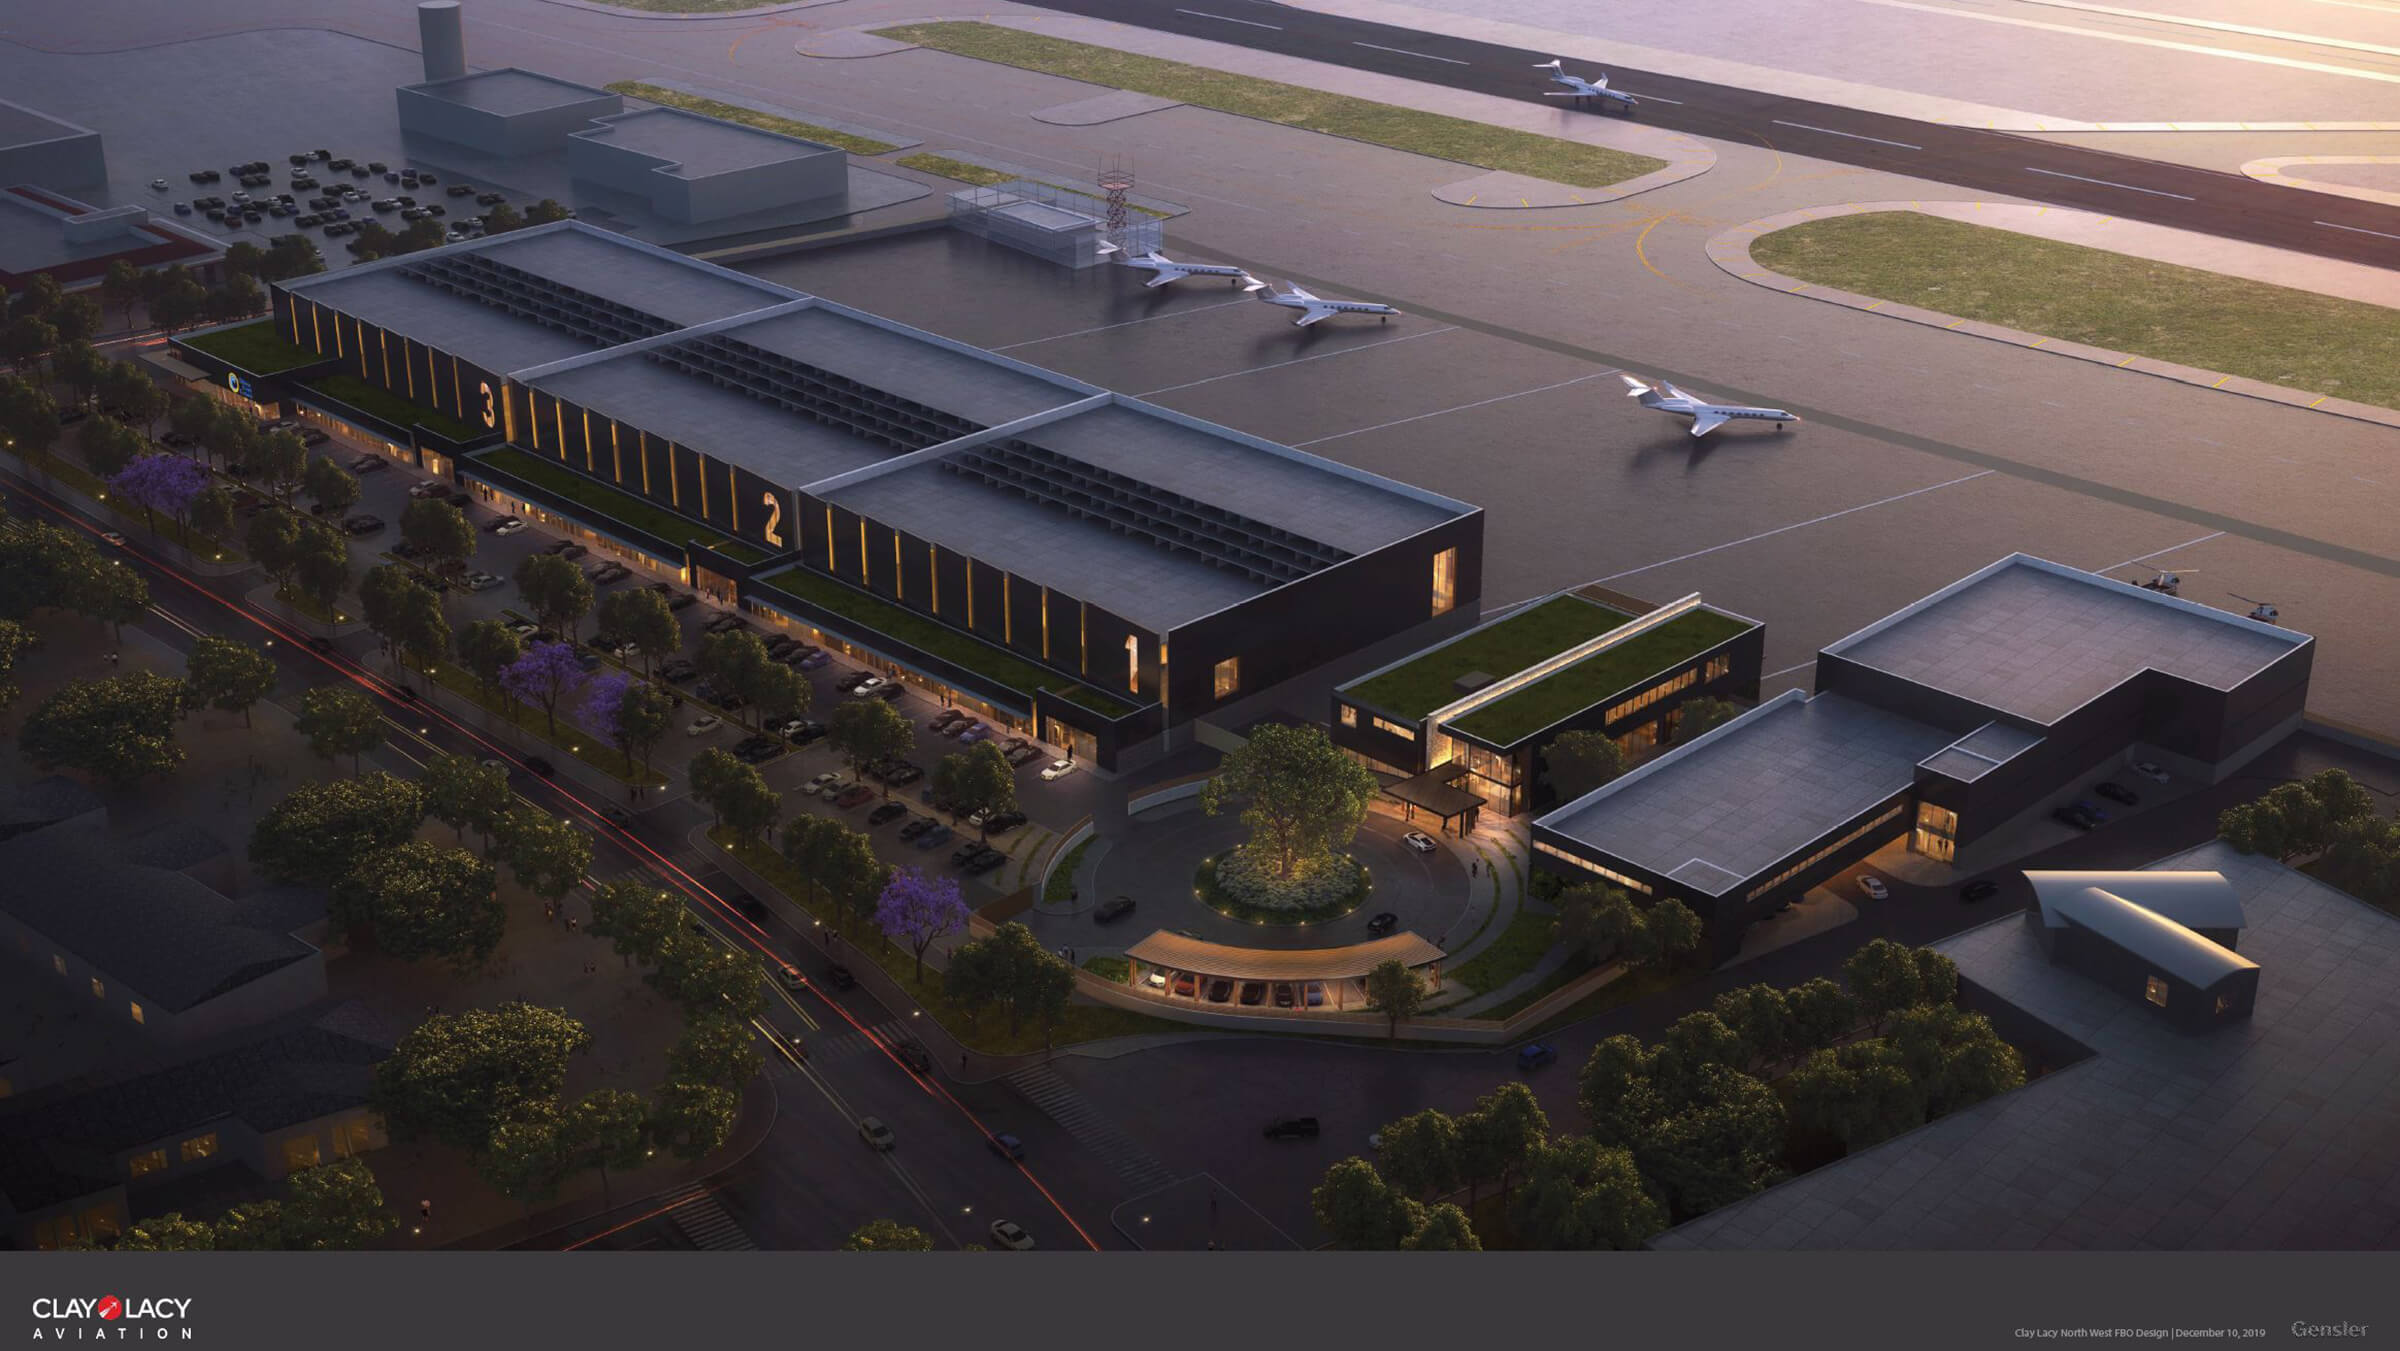 Rendering of planned Clay Lacy facility at John Wayne Airport, Orange County